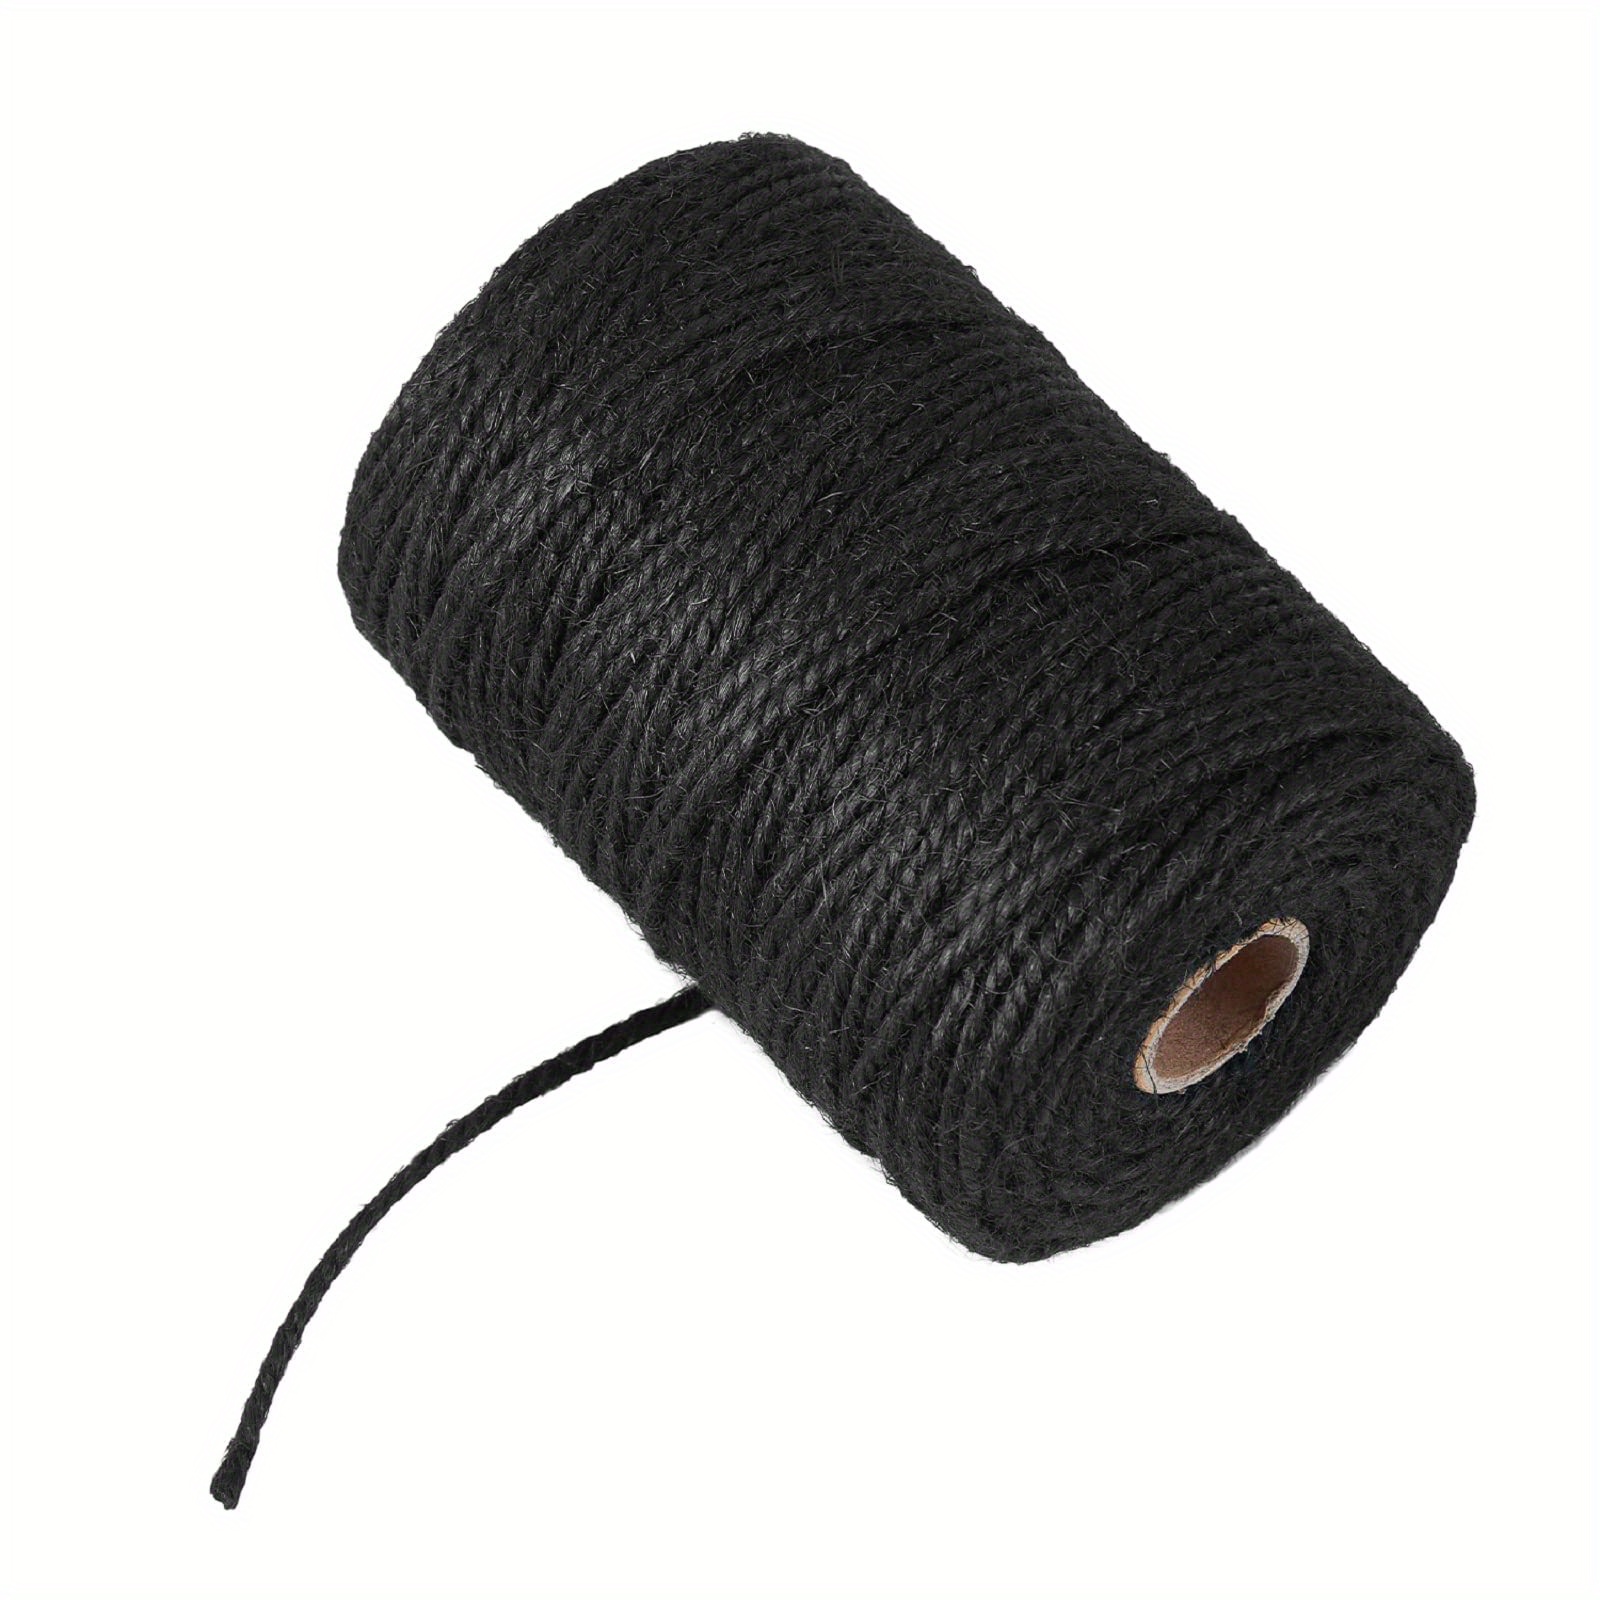 2mm 328 Feet Black Natural Jute Twine, For Crafts Gift, Craft Projects,  Wrapping, Bundling, Packing, Holiday Packaging Twine, Gardening And More,  Jute